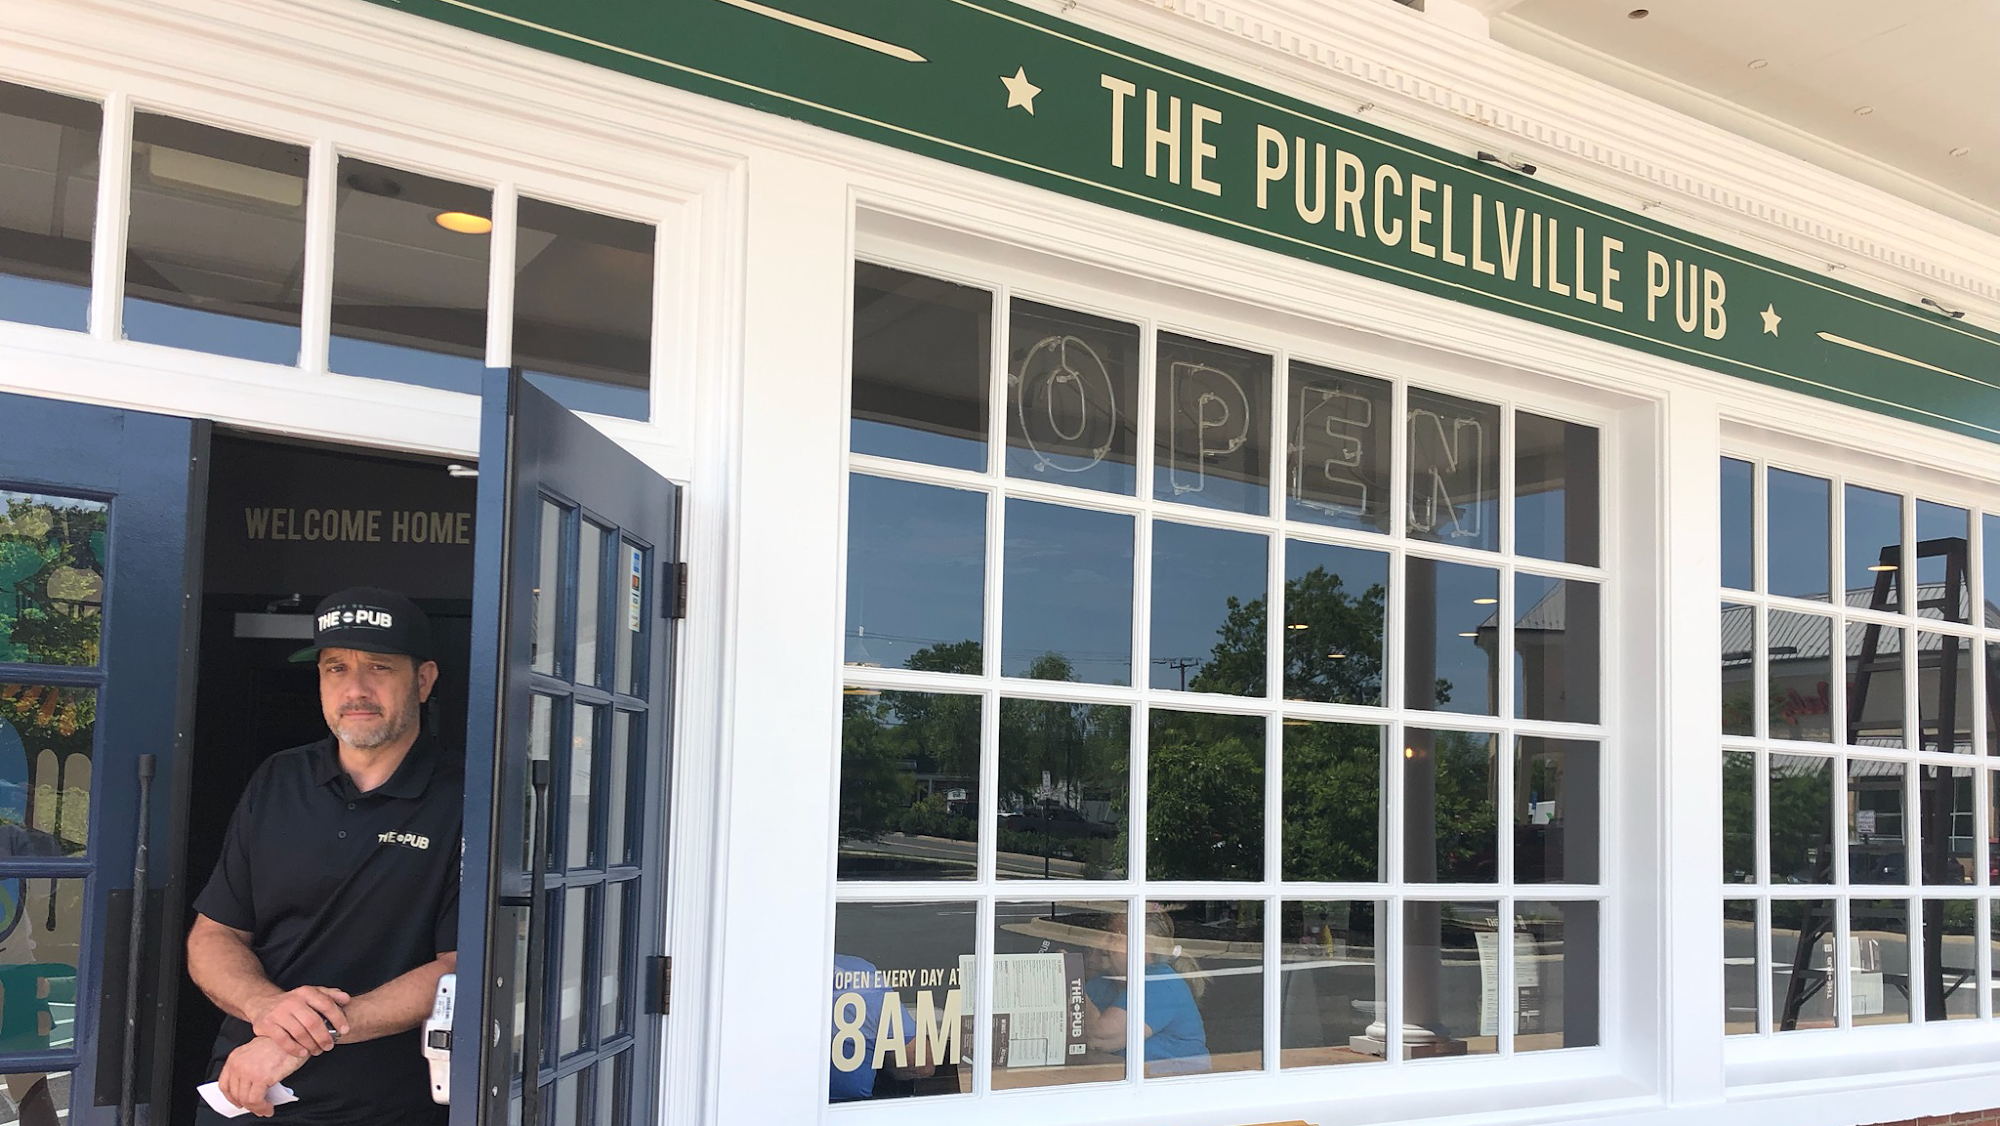 The Purcellville Pub